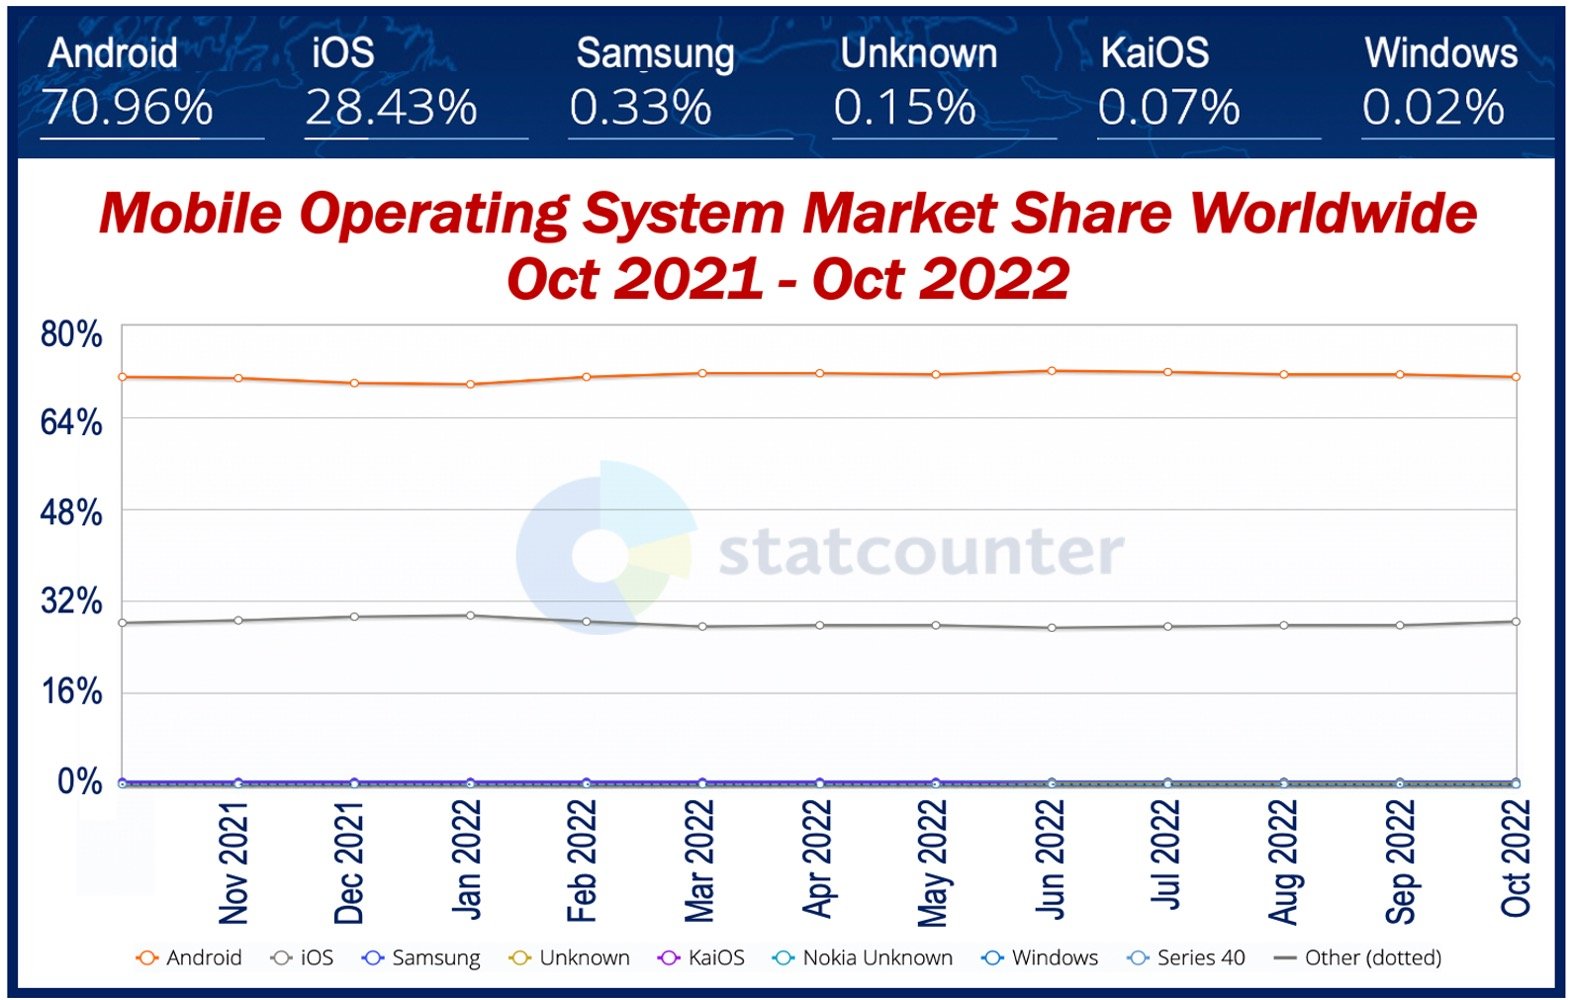 Mobile operating systems market share